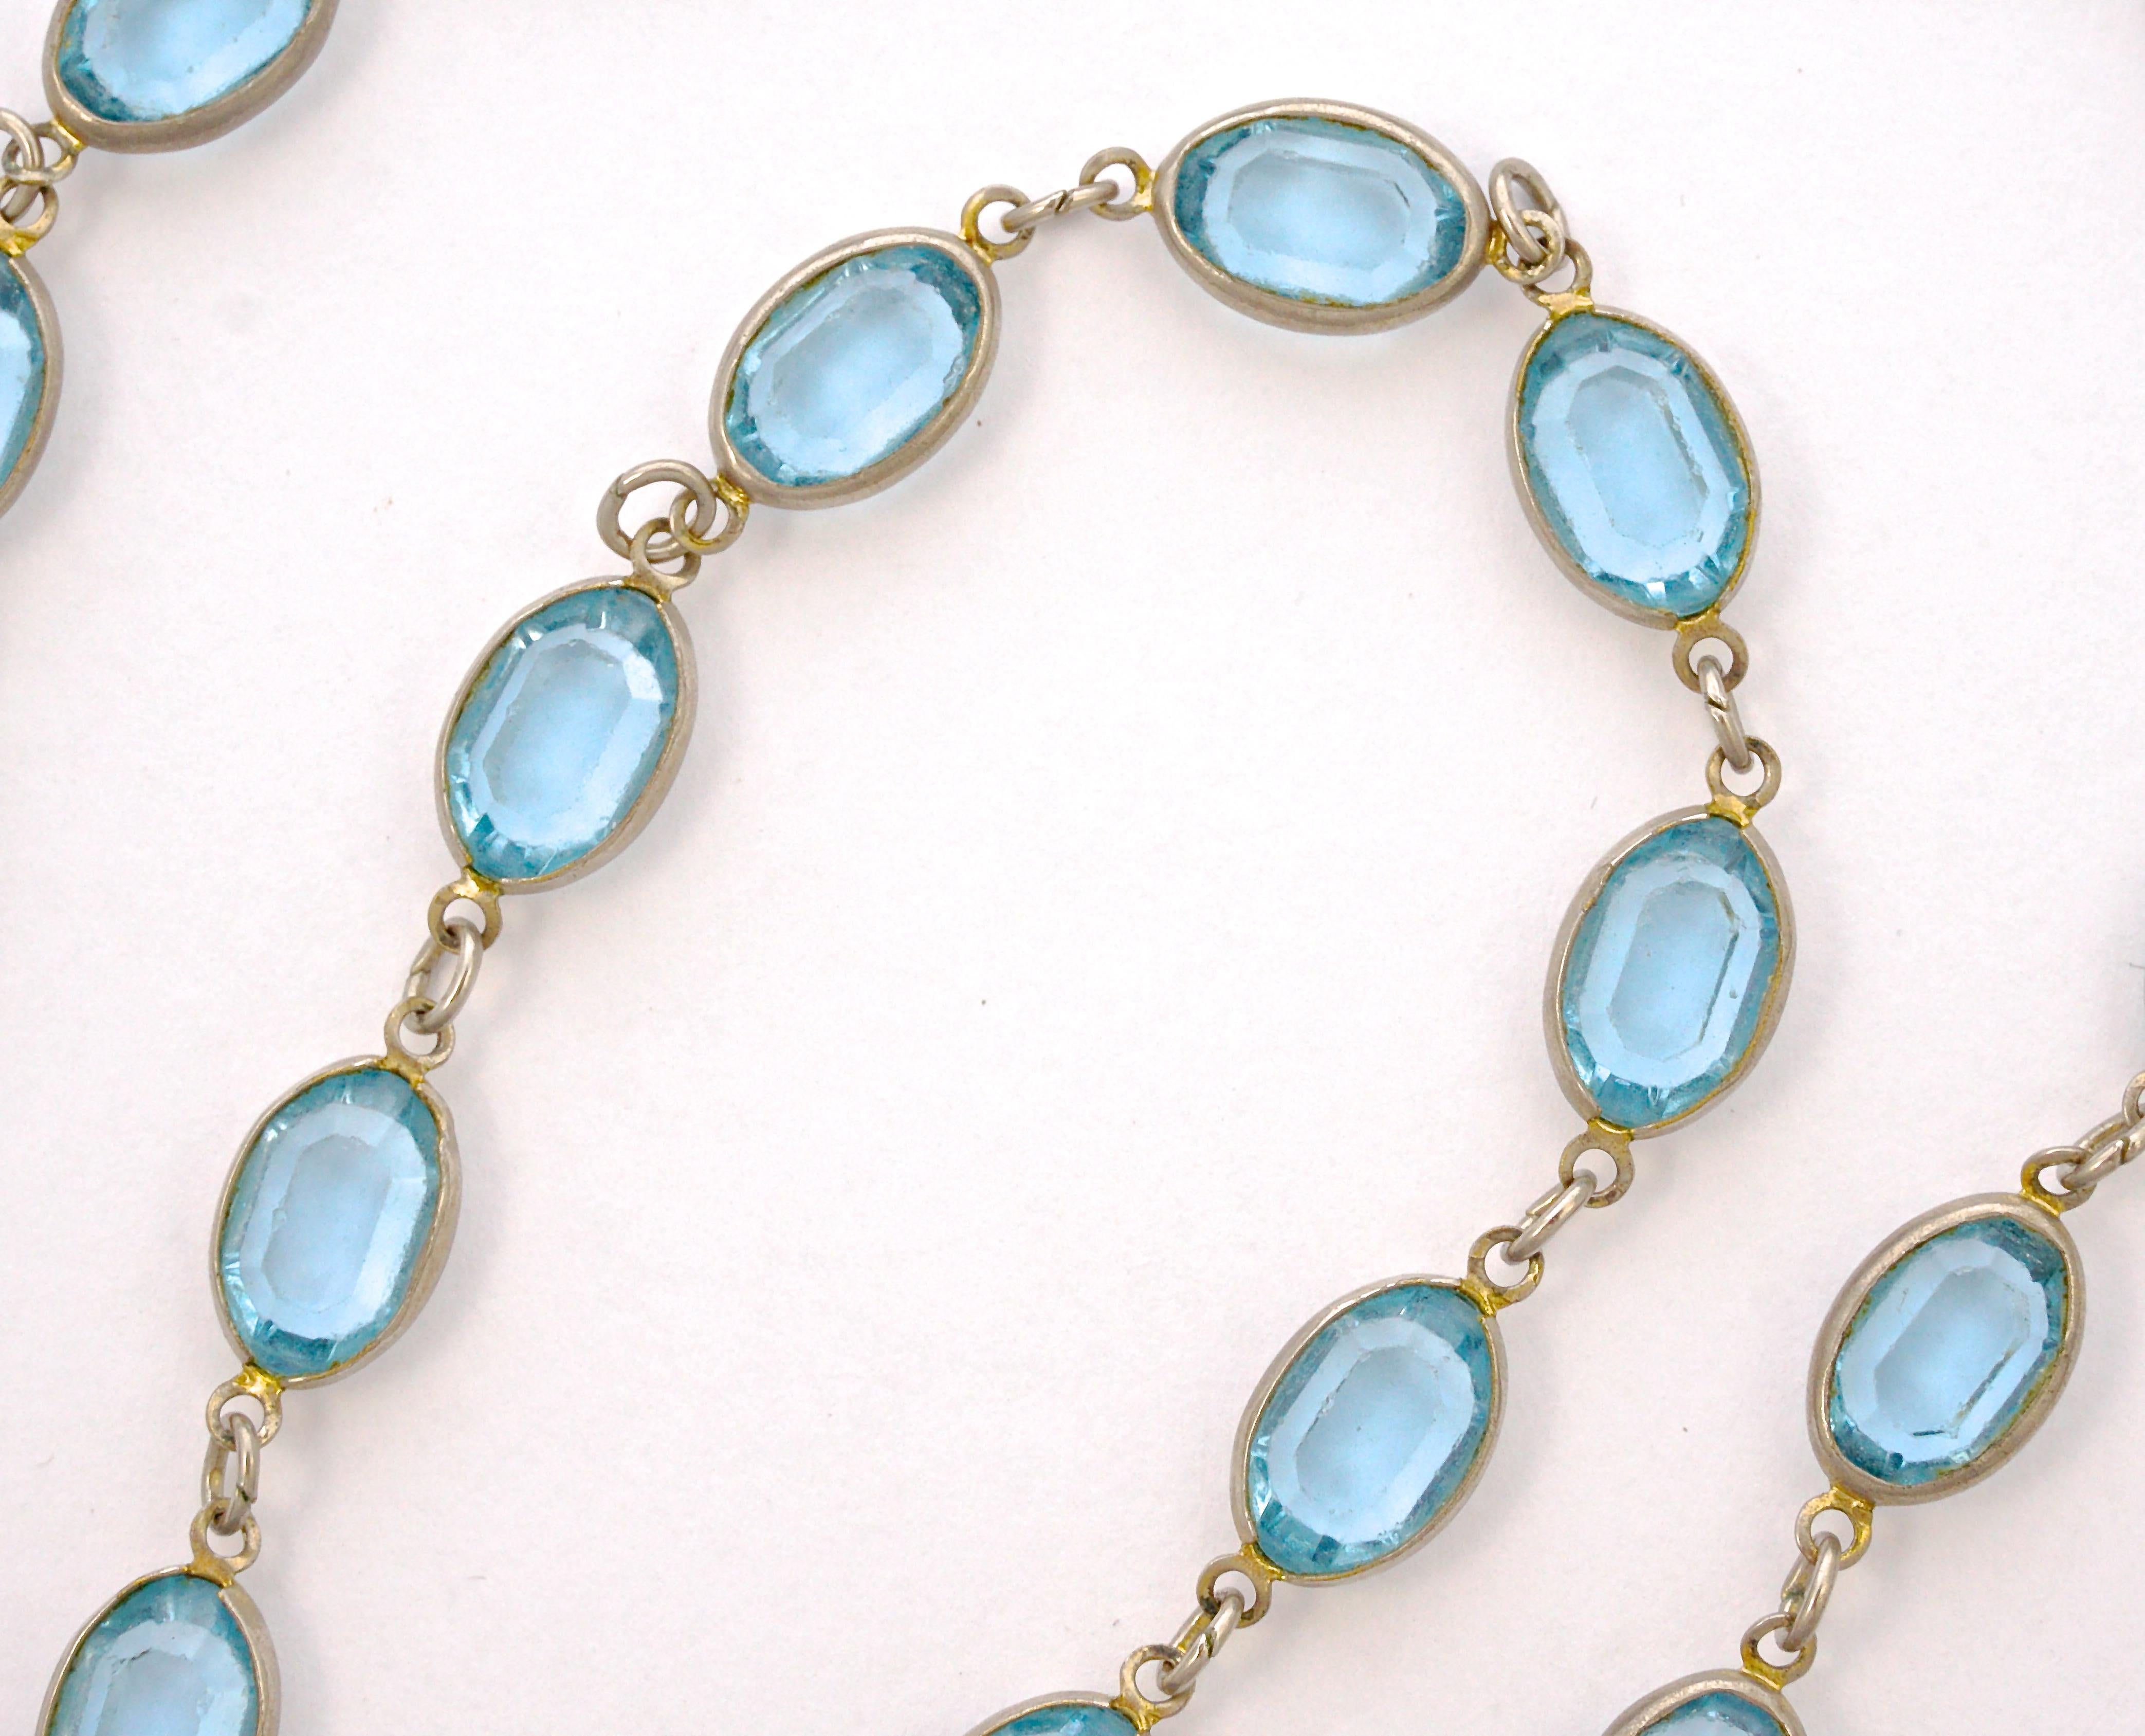 Long silver tone necklace with a spring bolt clasp, featuring lovely bezel set oval blue glass links. The glass stones are faceted and open back to catch the light. Measuring length 125cm / 49.21 inches and the glass jewels measure width 8mm / .31